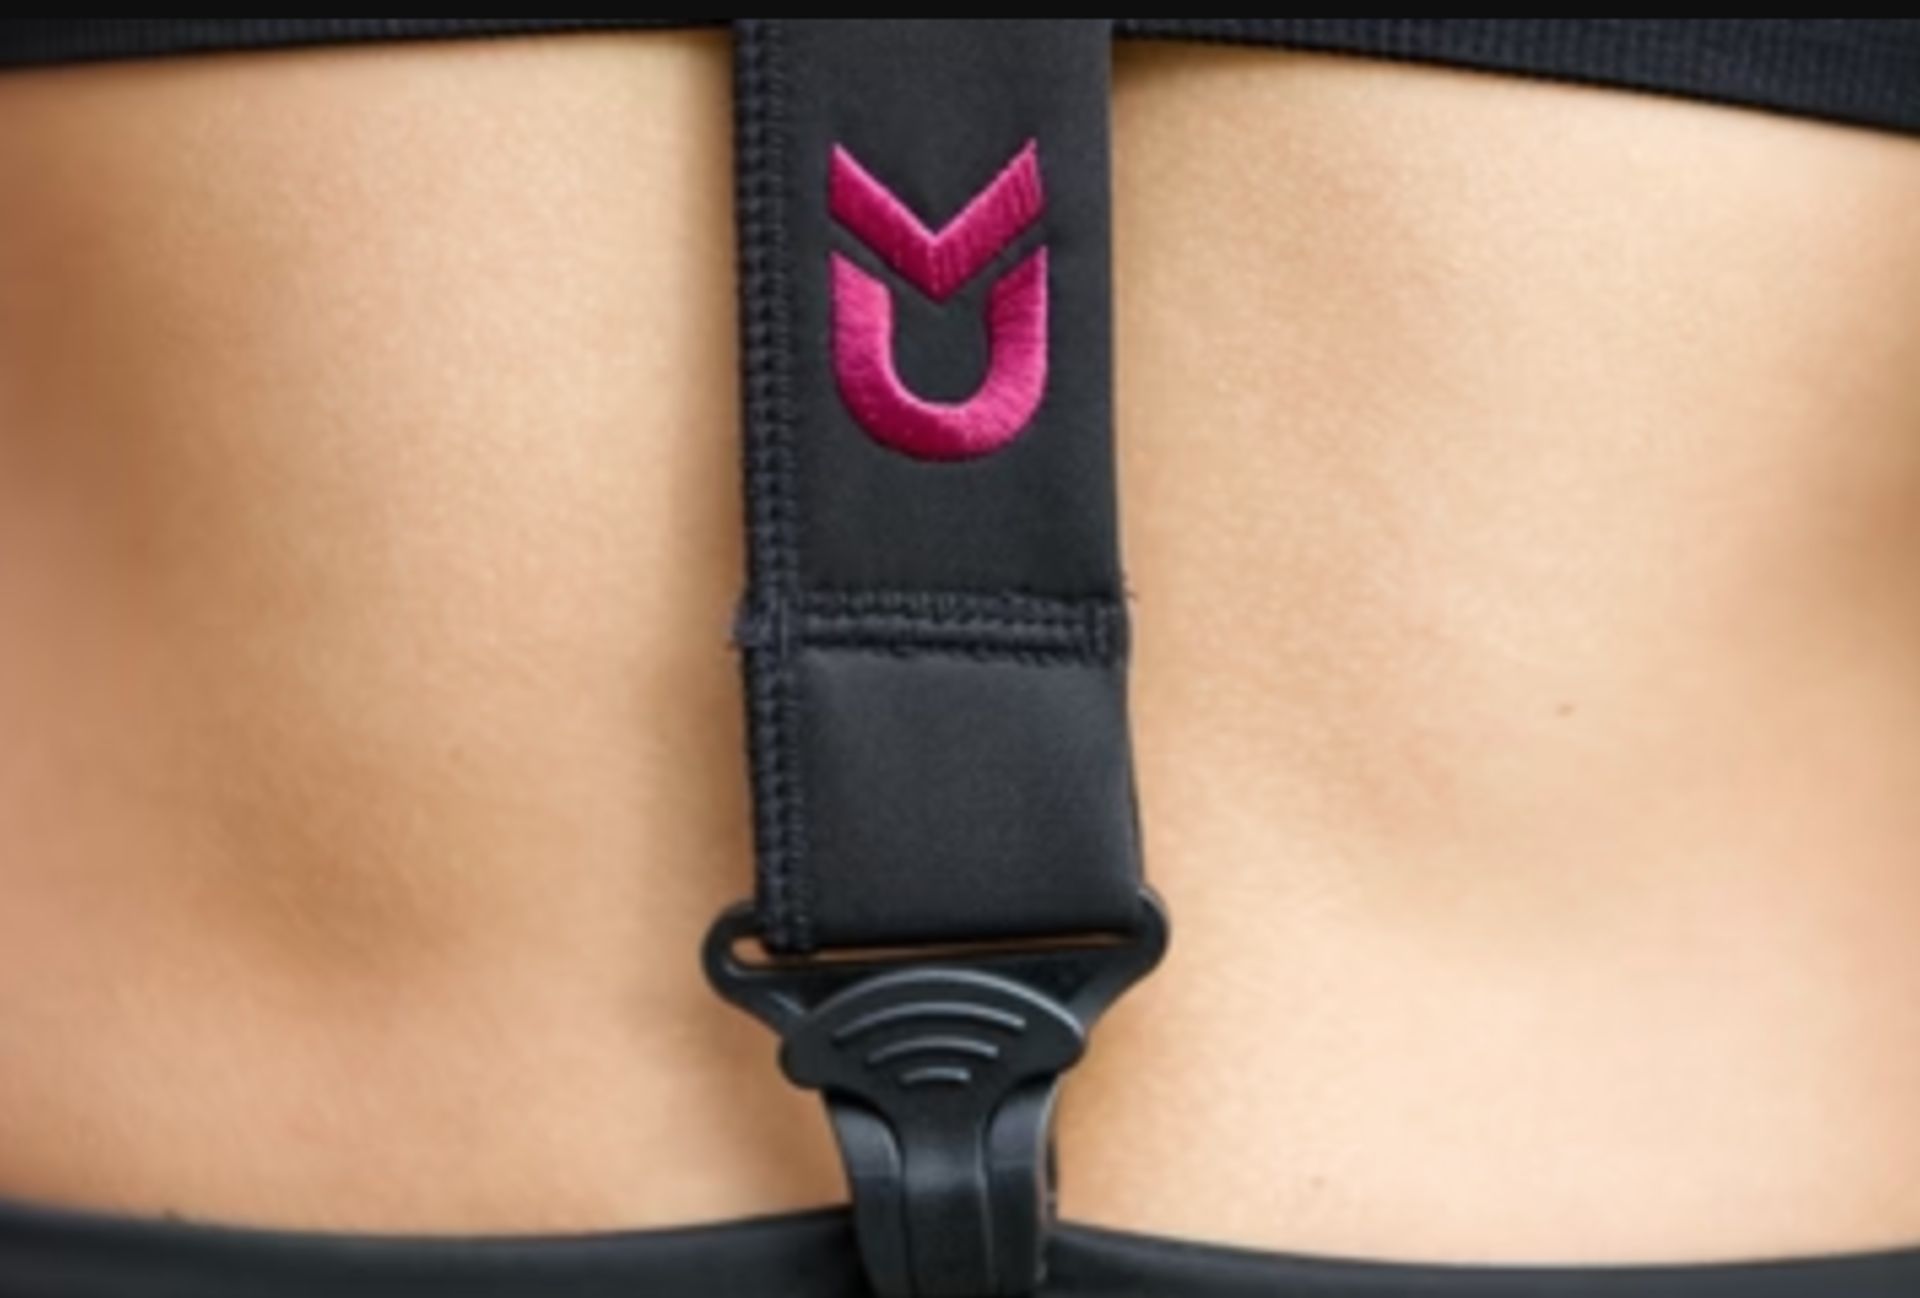 700 x FITUPS Fitness Braces/Suspenders For Running and Exercising Total RRP £21,000 - Image 3 of 3